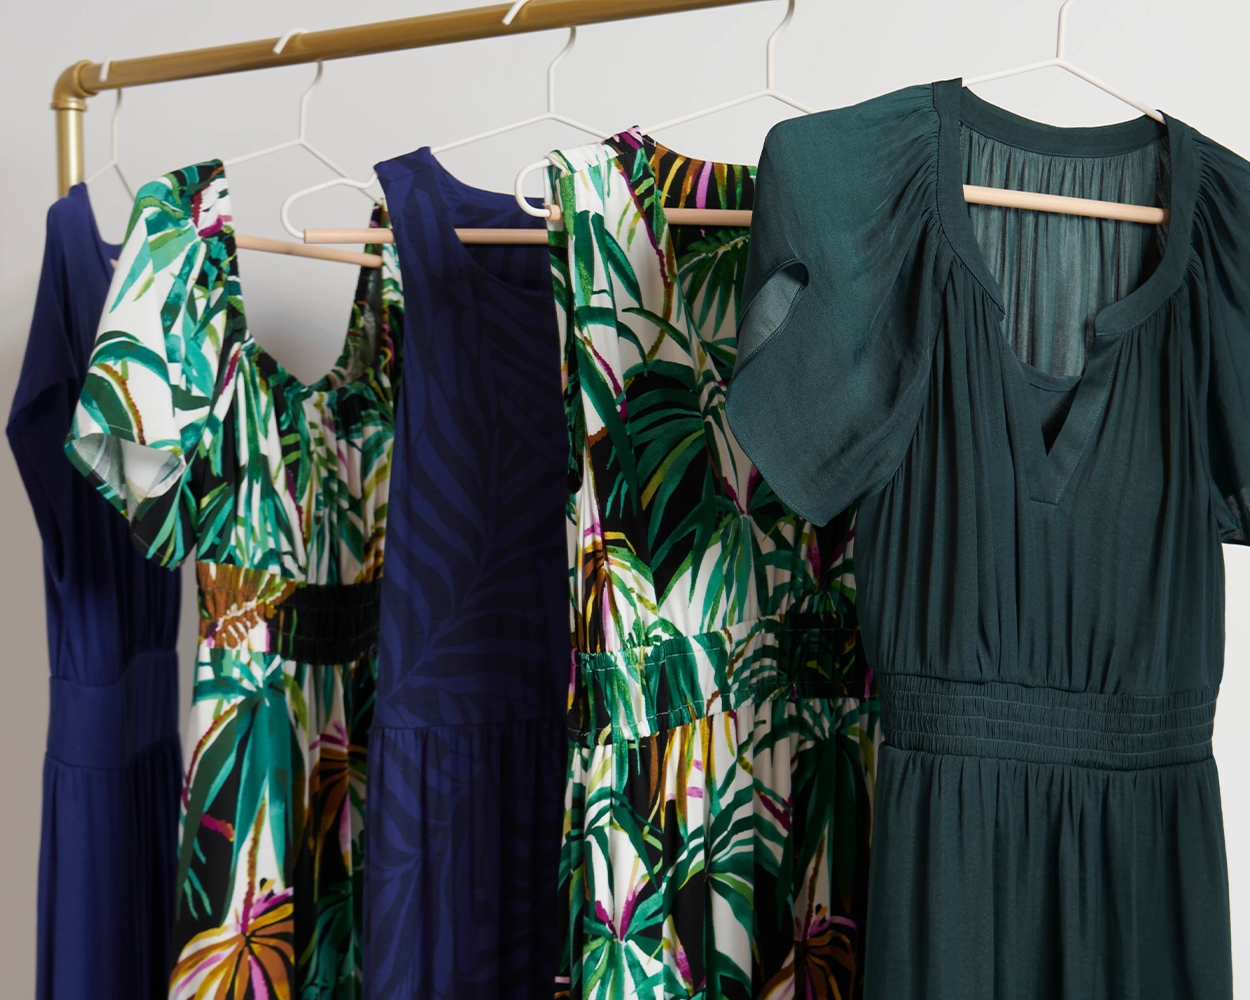 Soma<sup class=st-superscript>®</sup> bra dresses in solid green, blue, and palm print hanging on a clothing rack.